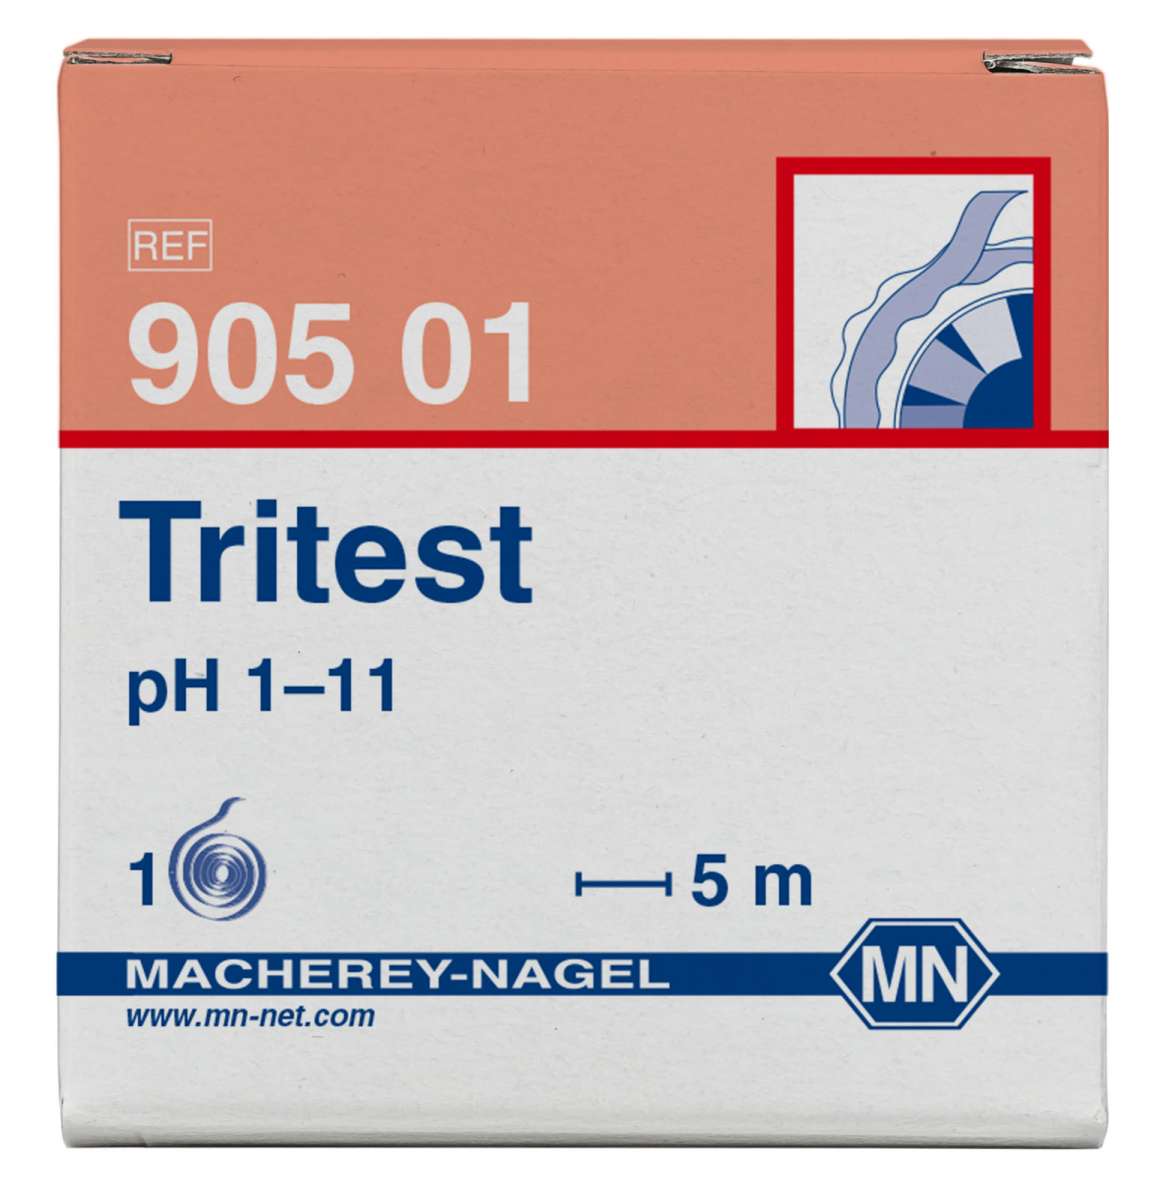 pH test paper Tritest pH 1-11, with 3 indicator zones (Reel of 5m length and 10mm width)